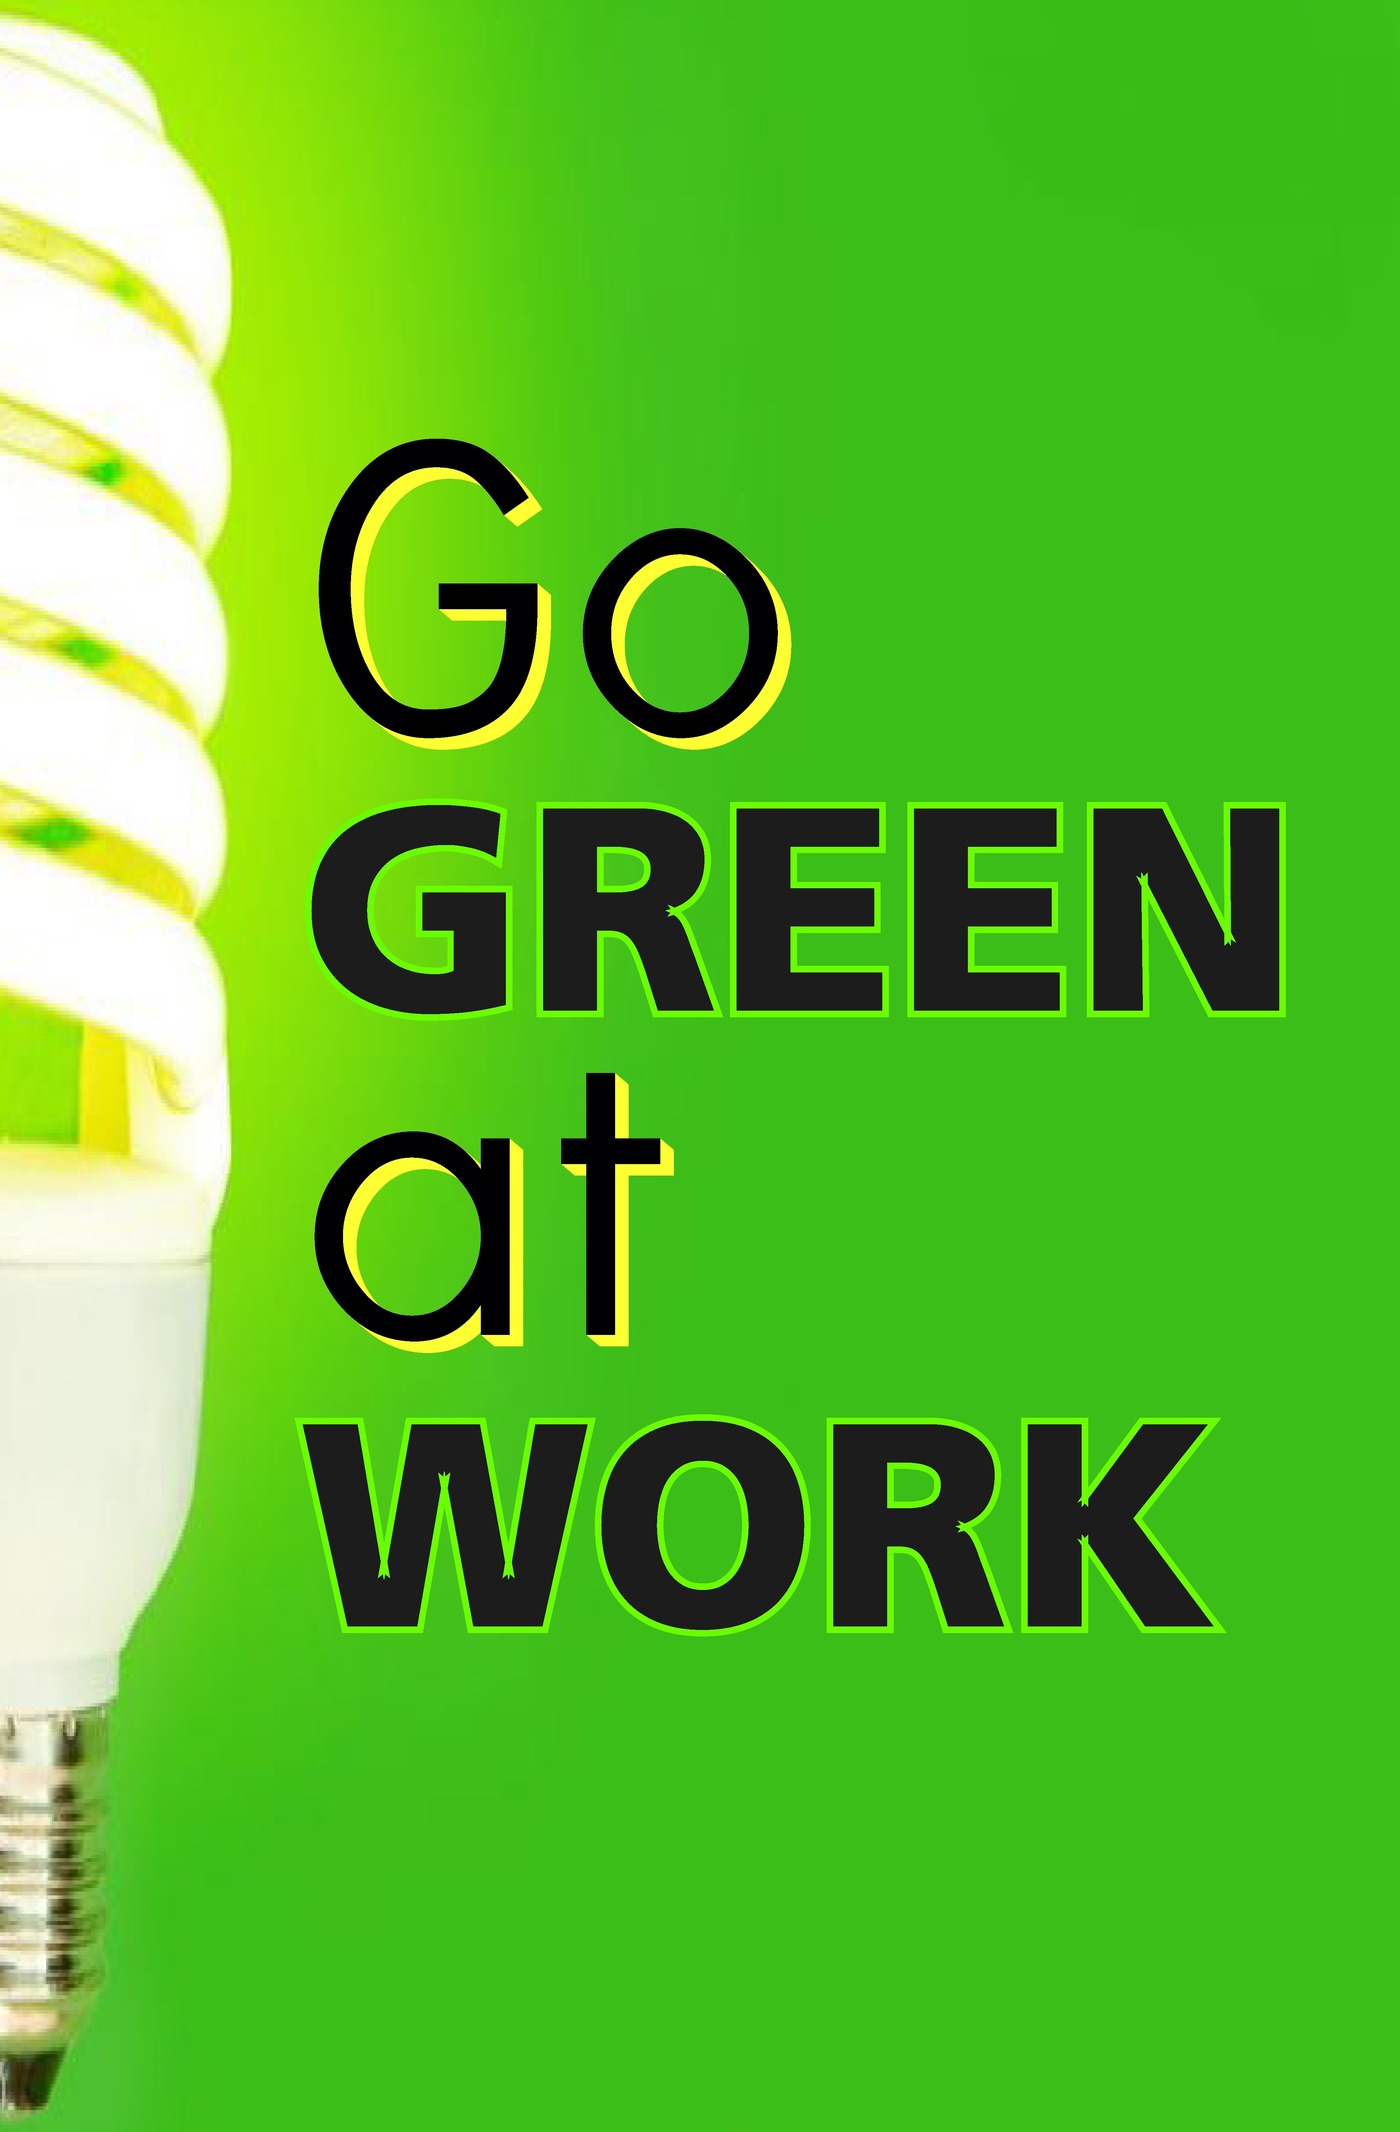 L7061 - Go Green at Work